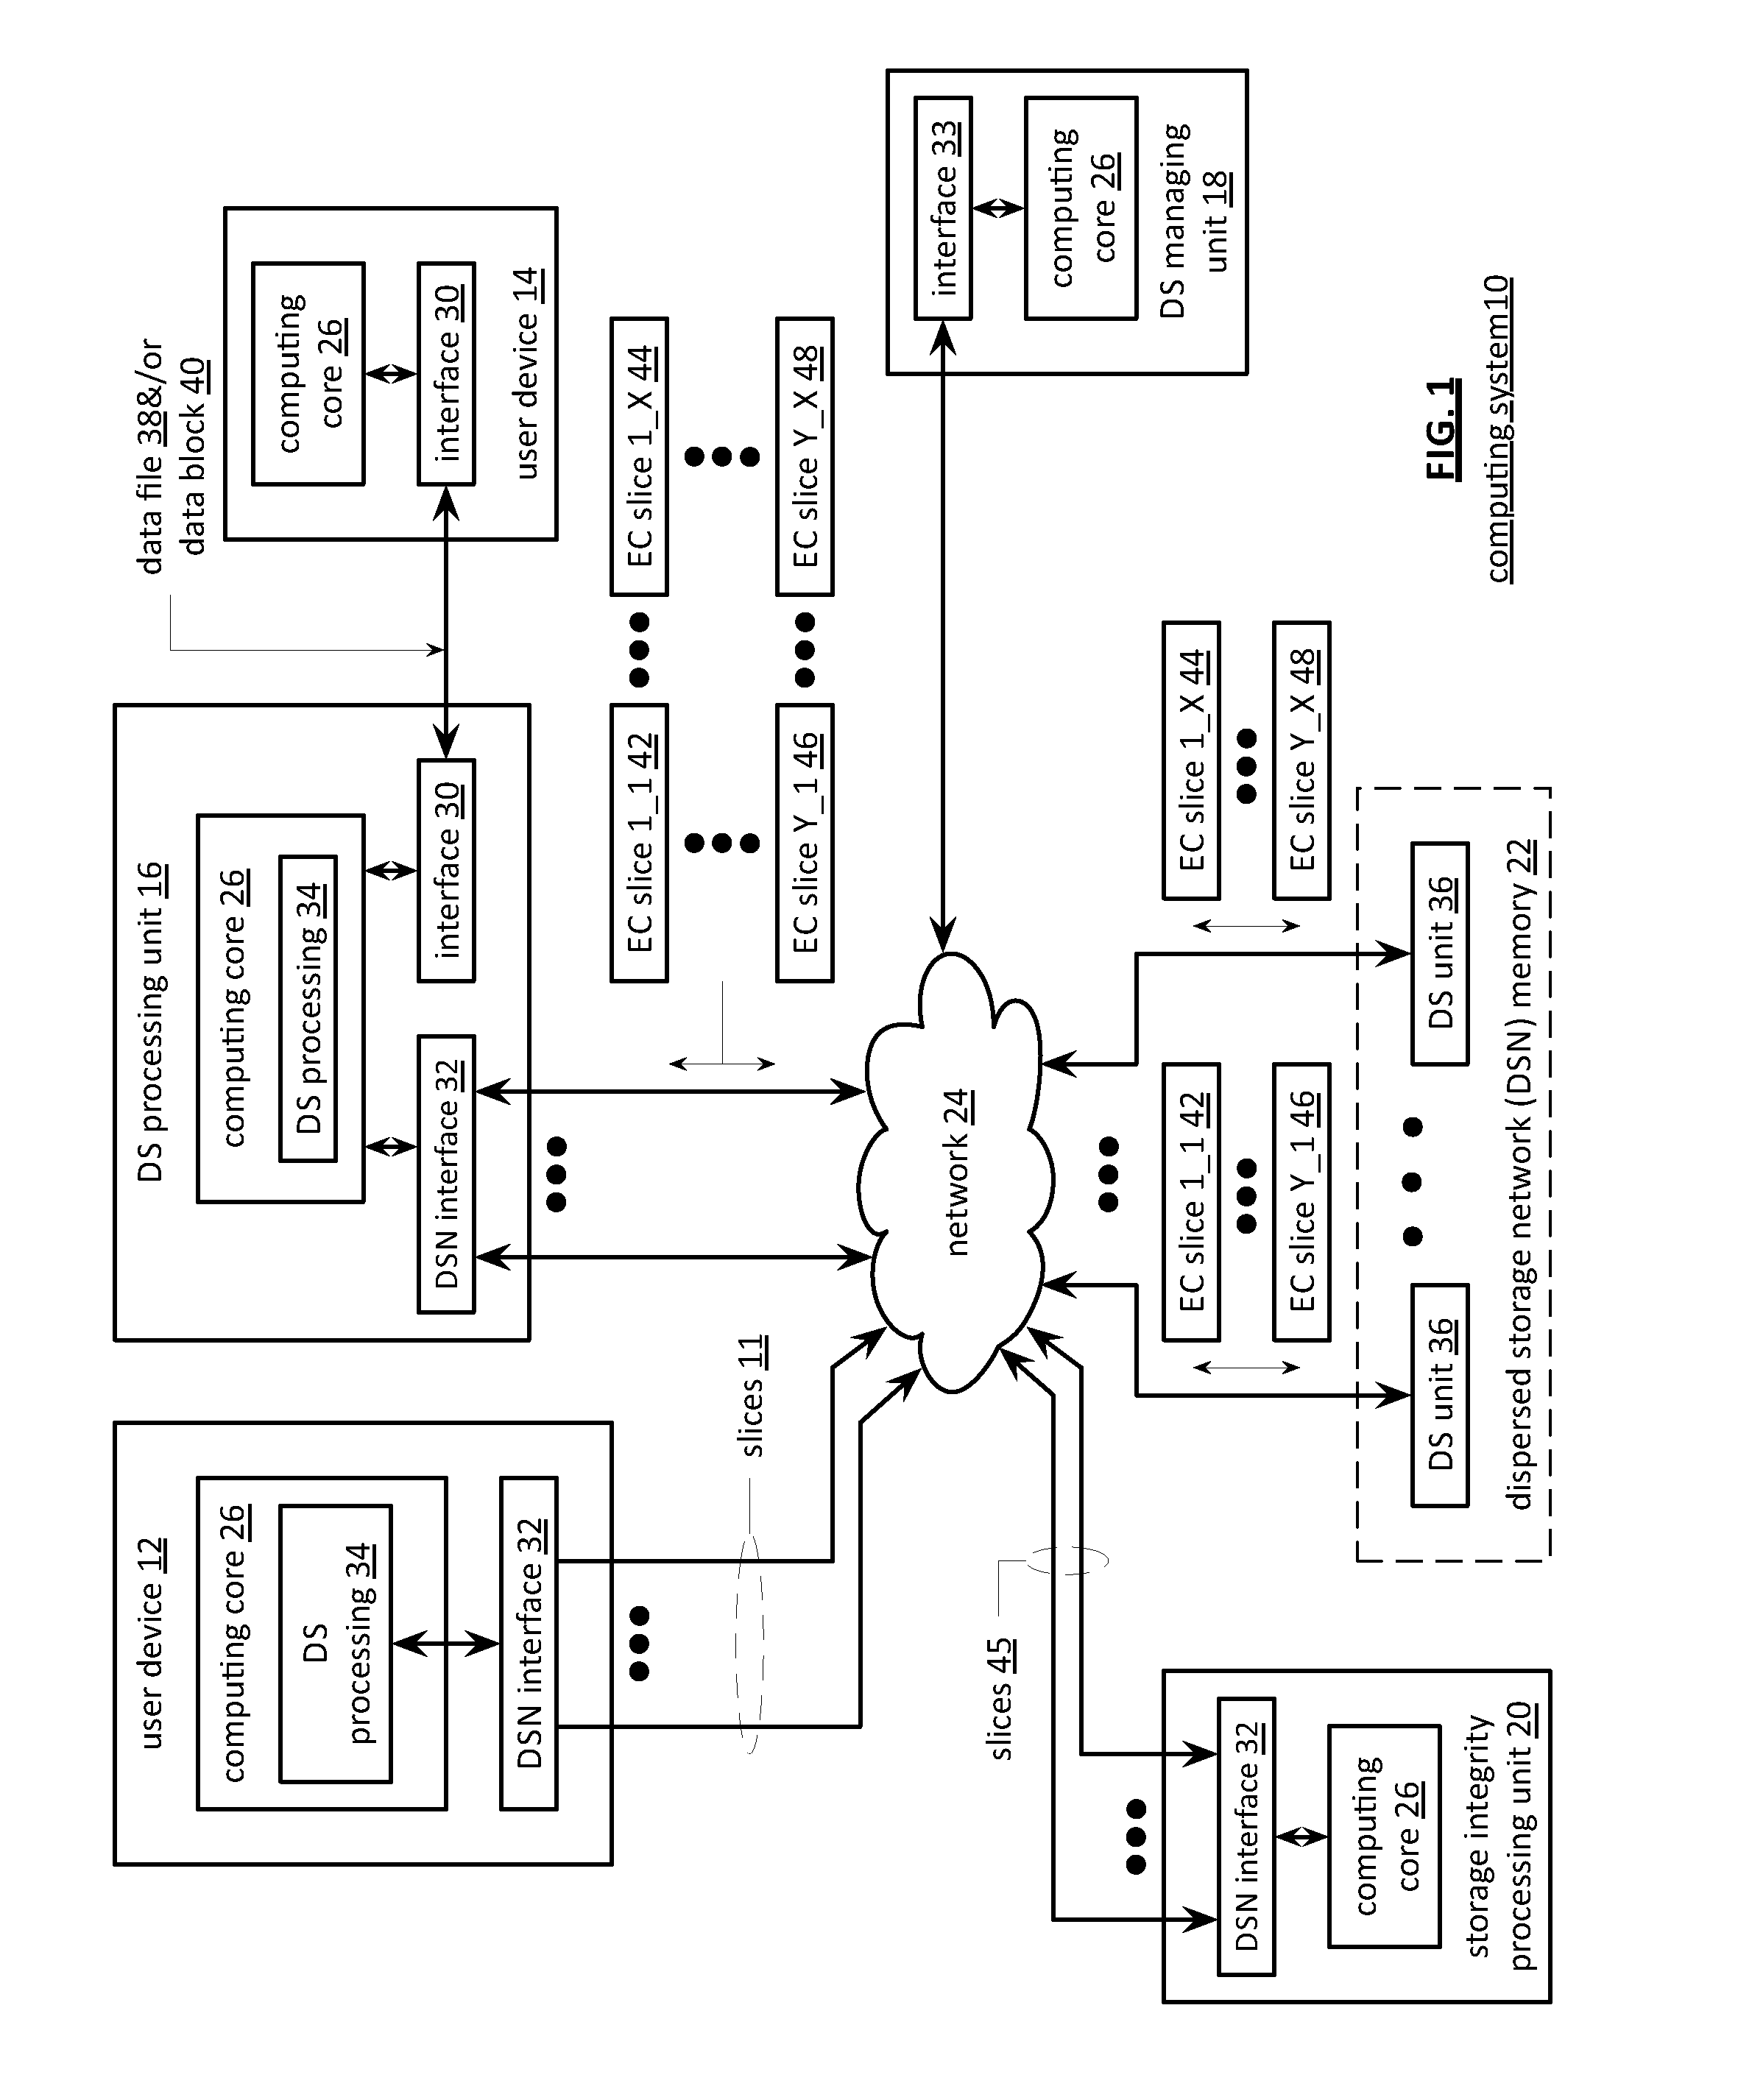 File retrieval during a legacy storage system to dispersed storage network migration